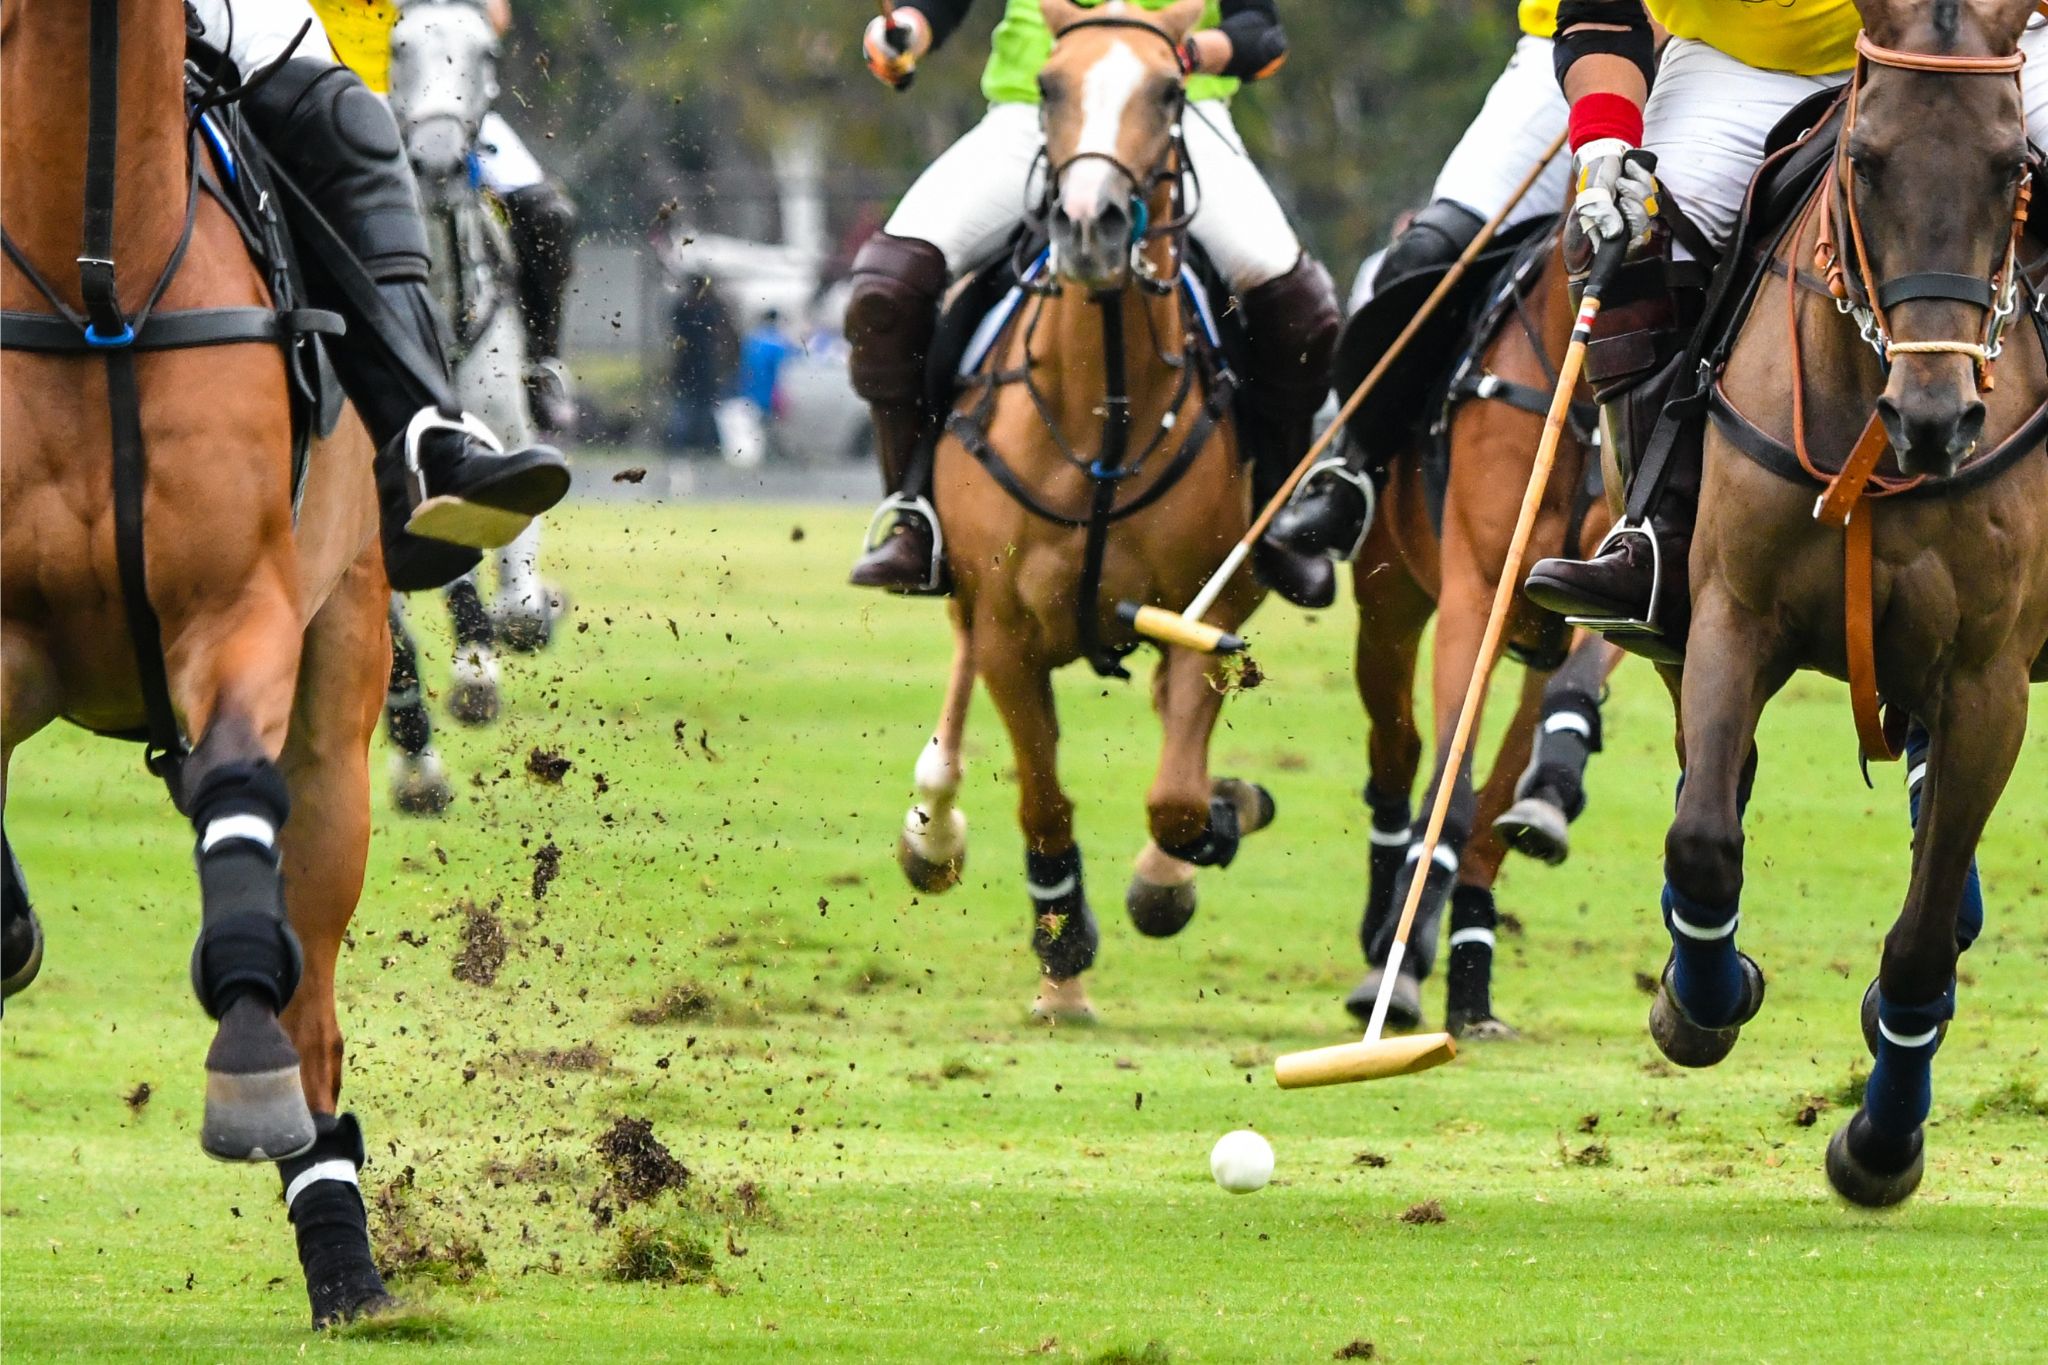 a period of play in a polo match